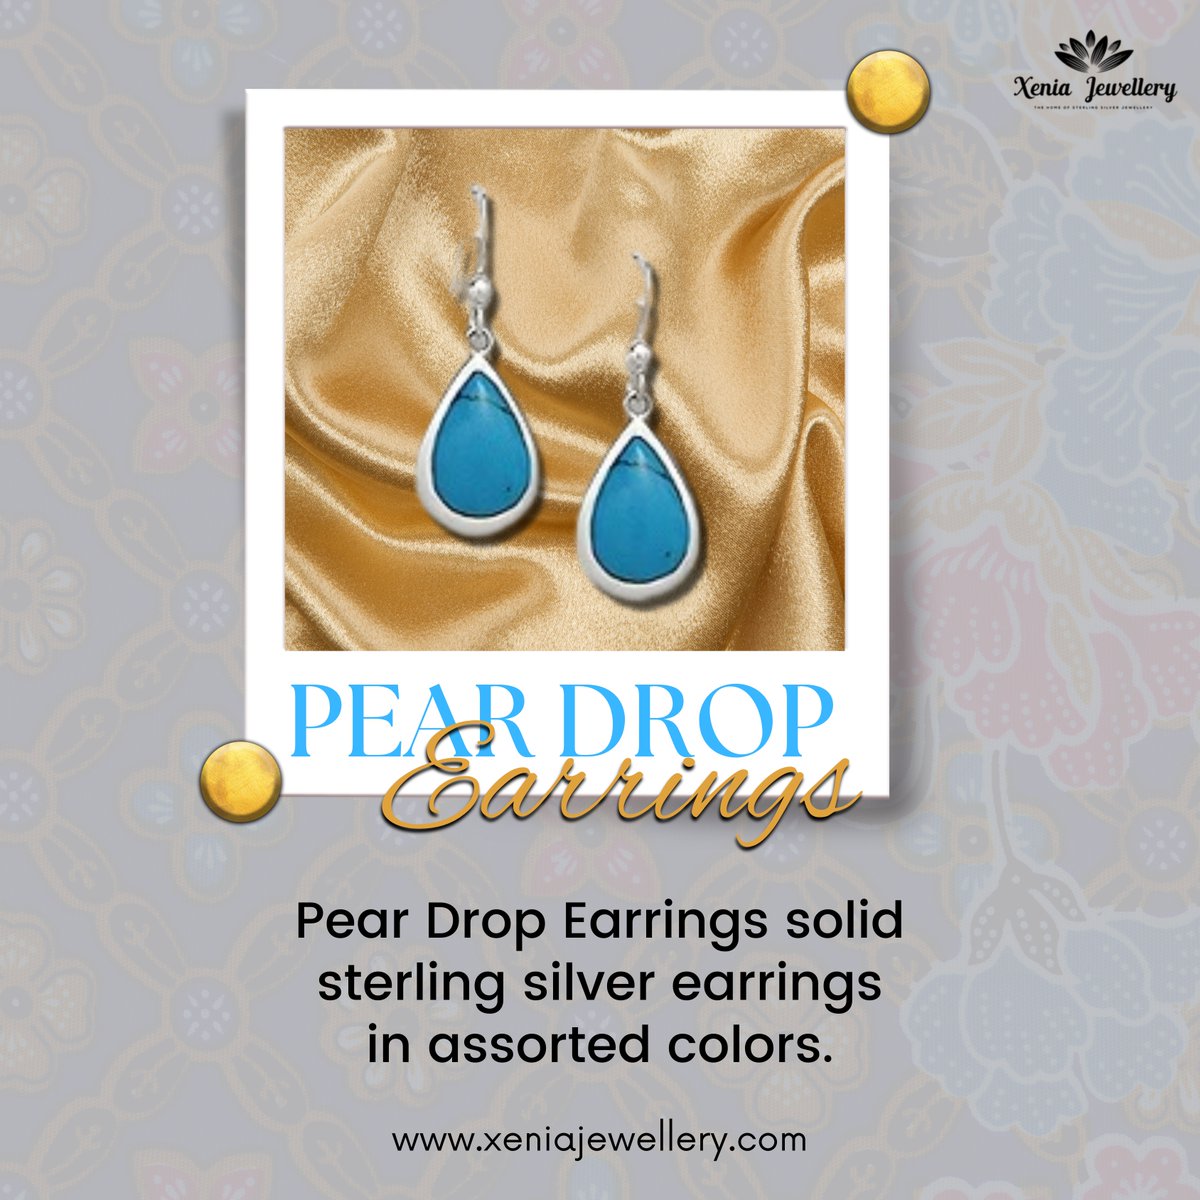 Pear Drop Earrings solid sterling silver earrings in assorted colors. available in reconstituted Green turquoise and blue turquoise as well as red resin.
#xeniajewellery #xenia #earrings #accessories  #jewels #rings #bracelets #ukjewellery